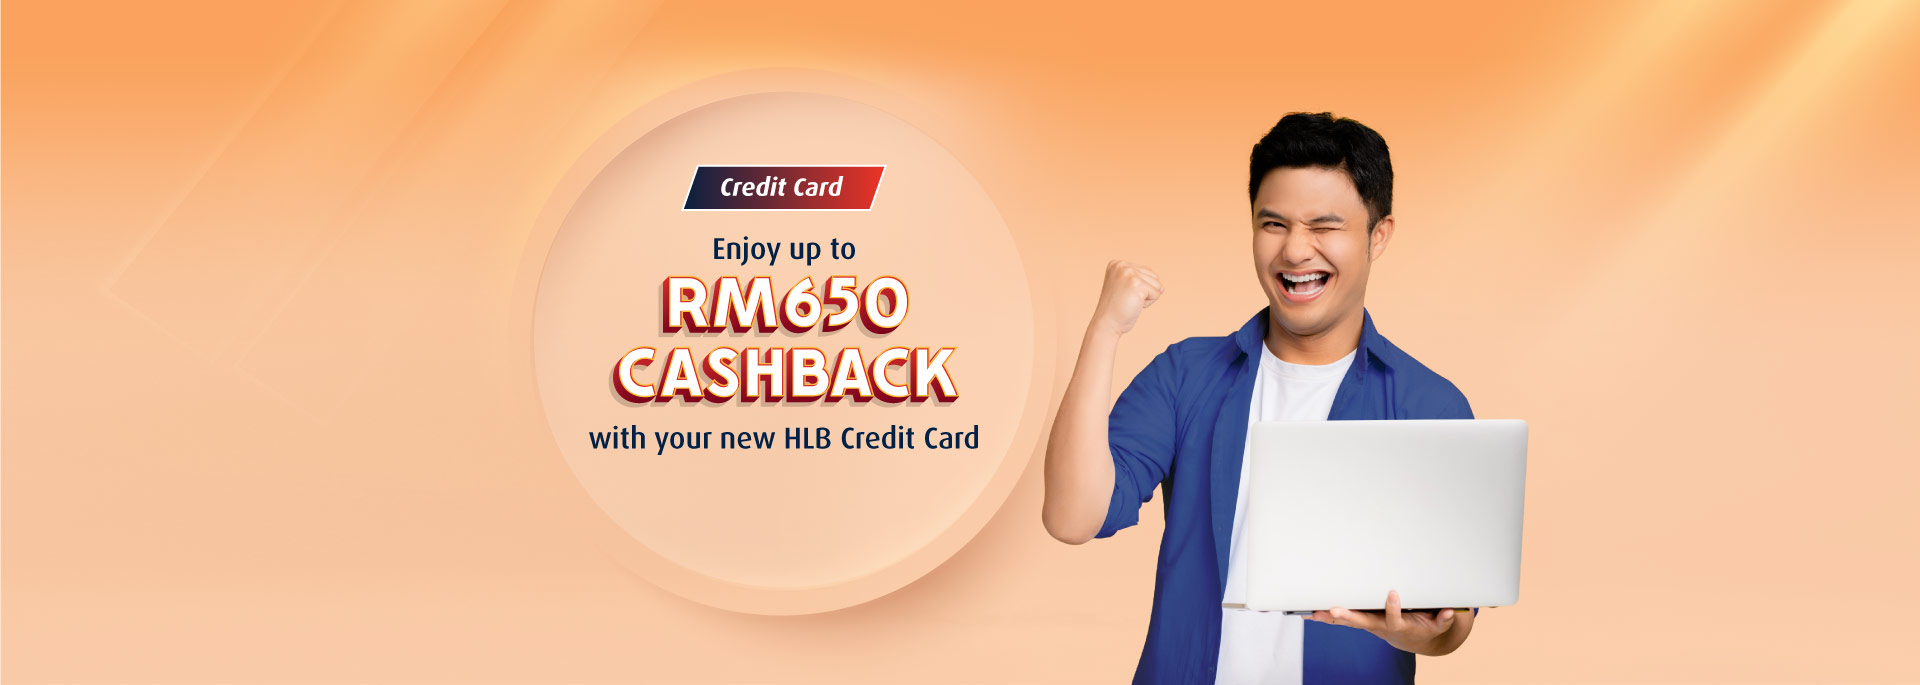 Shopping for this year? Earn cashback when you spend with your new HLB Credit Card.